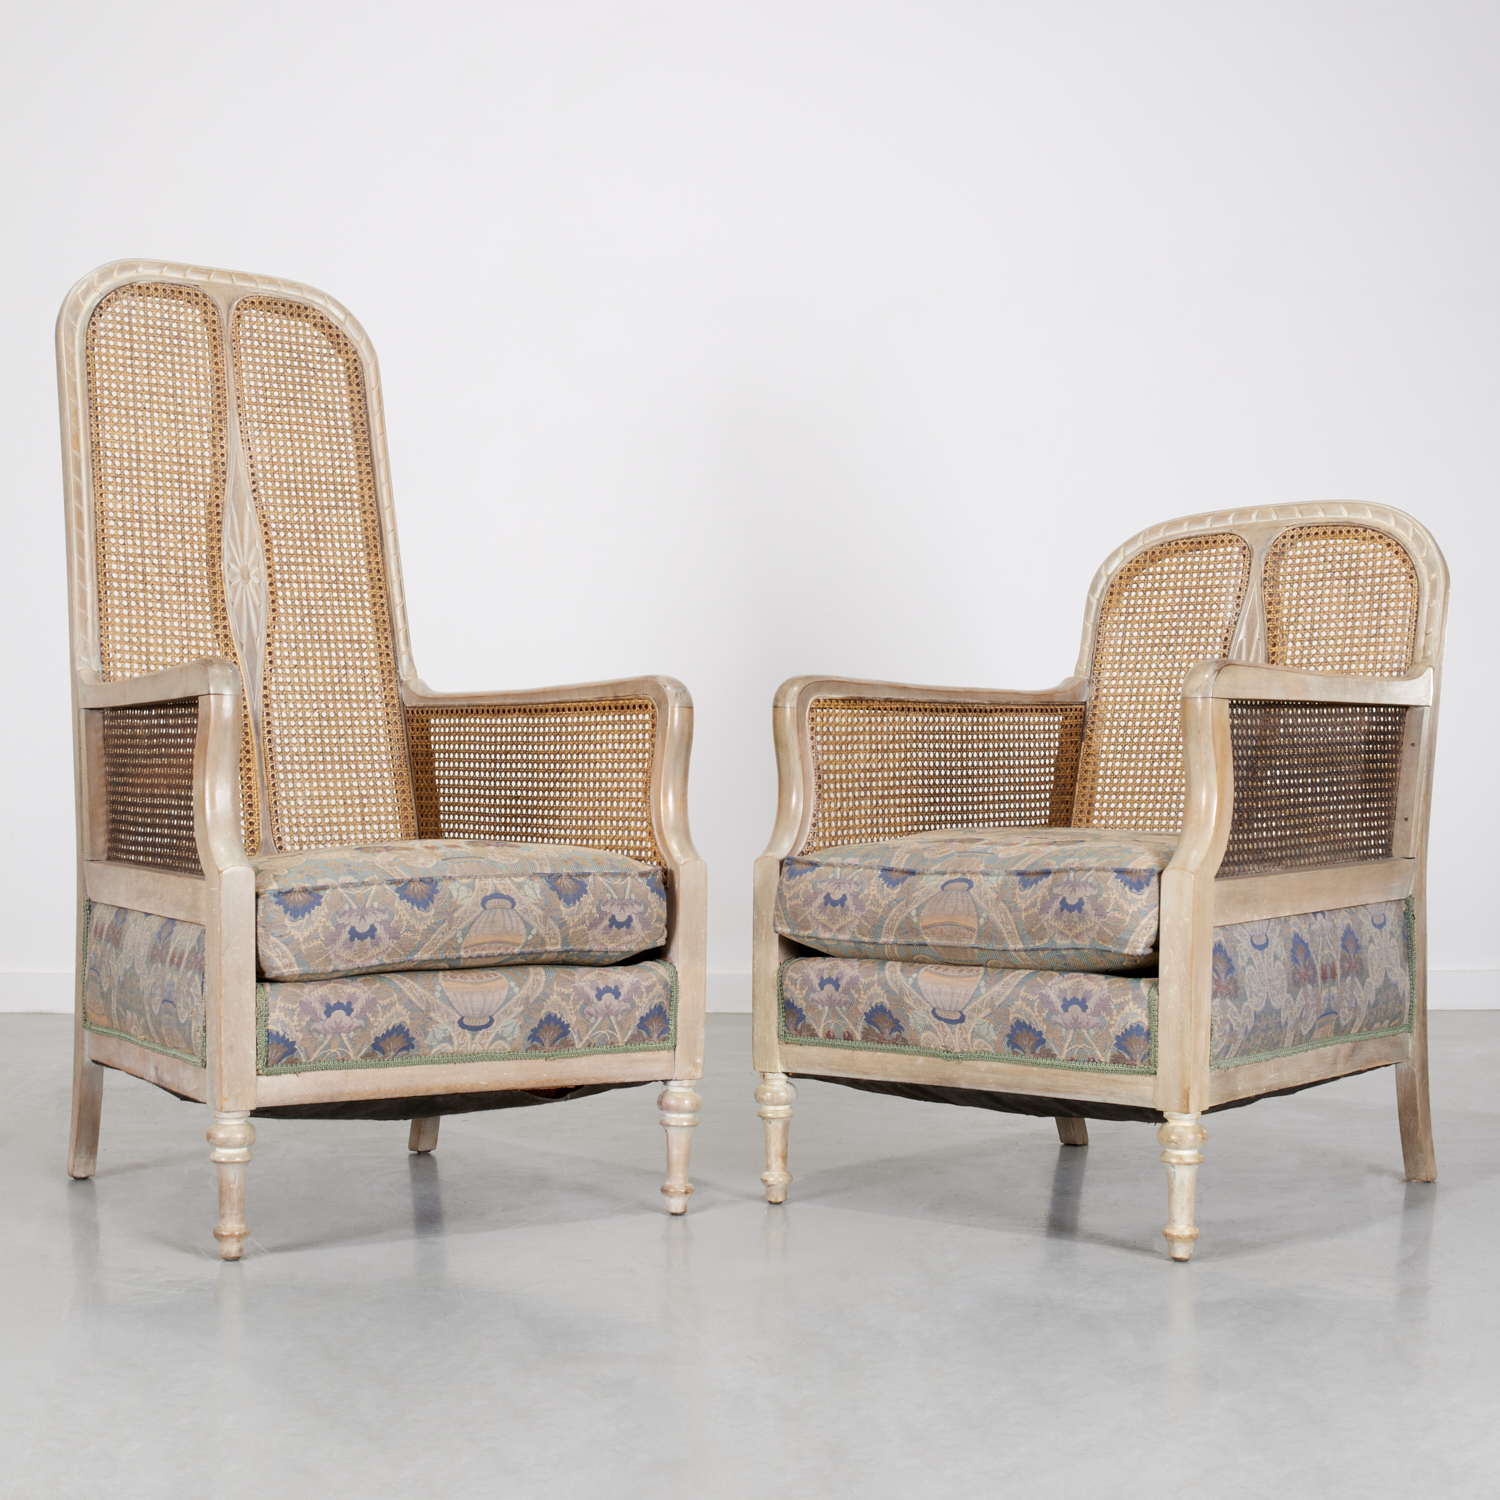 PAIR REGENCY STYLE 'HIS AND HERS'